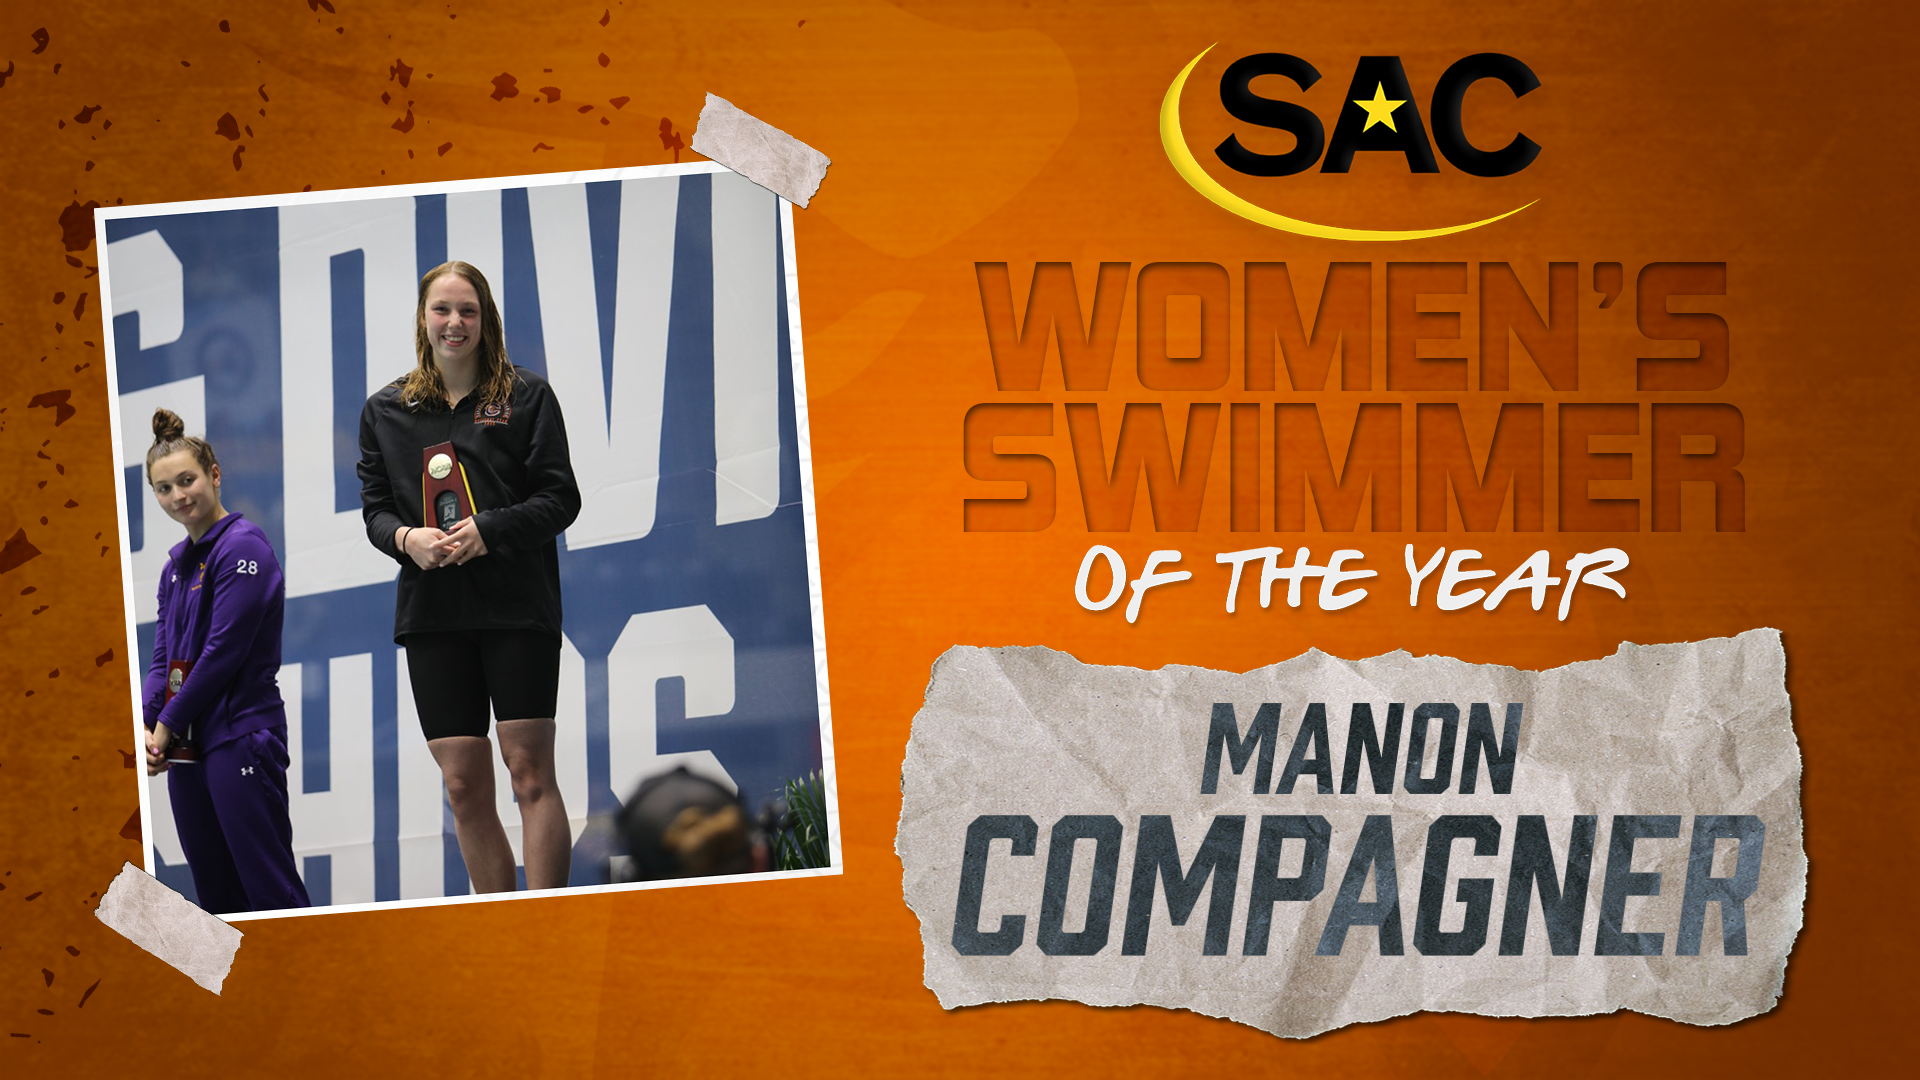 Compagner named SAC Women's Swimmer of the Year